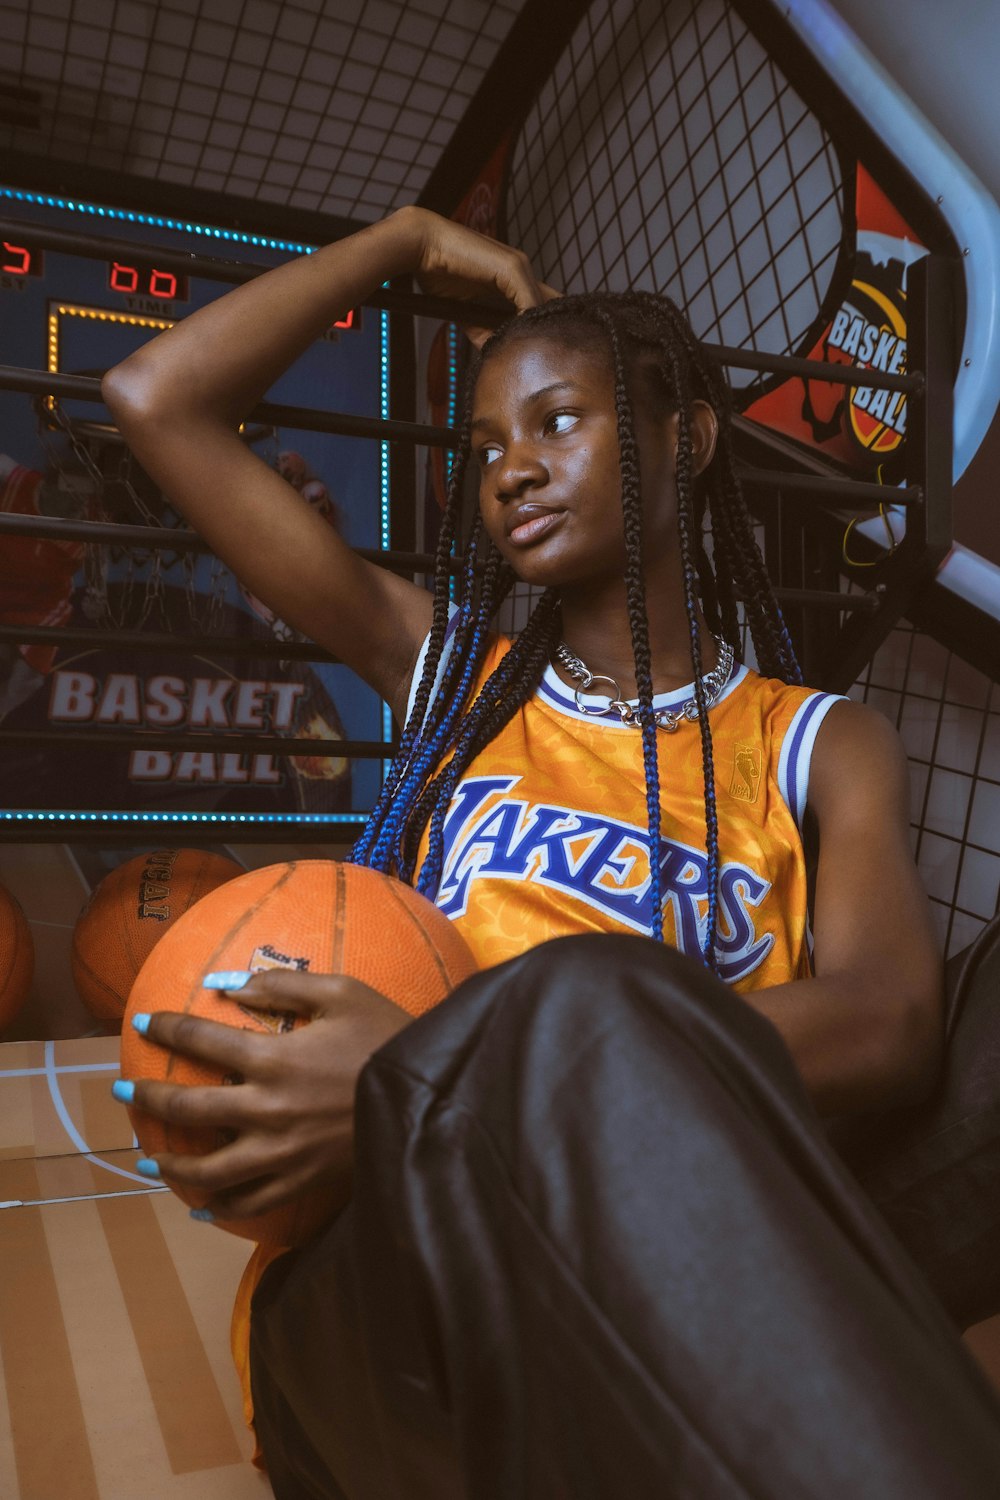 a woman sitting in a chair holding a basketball